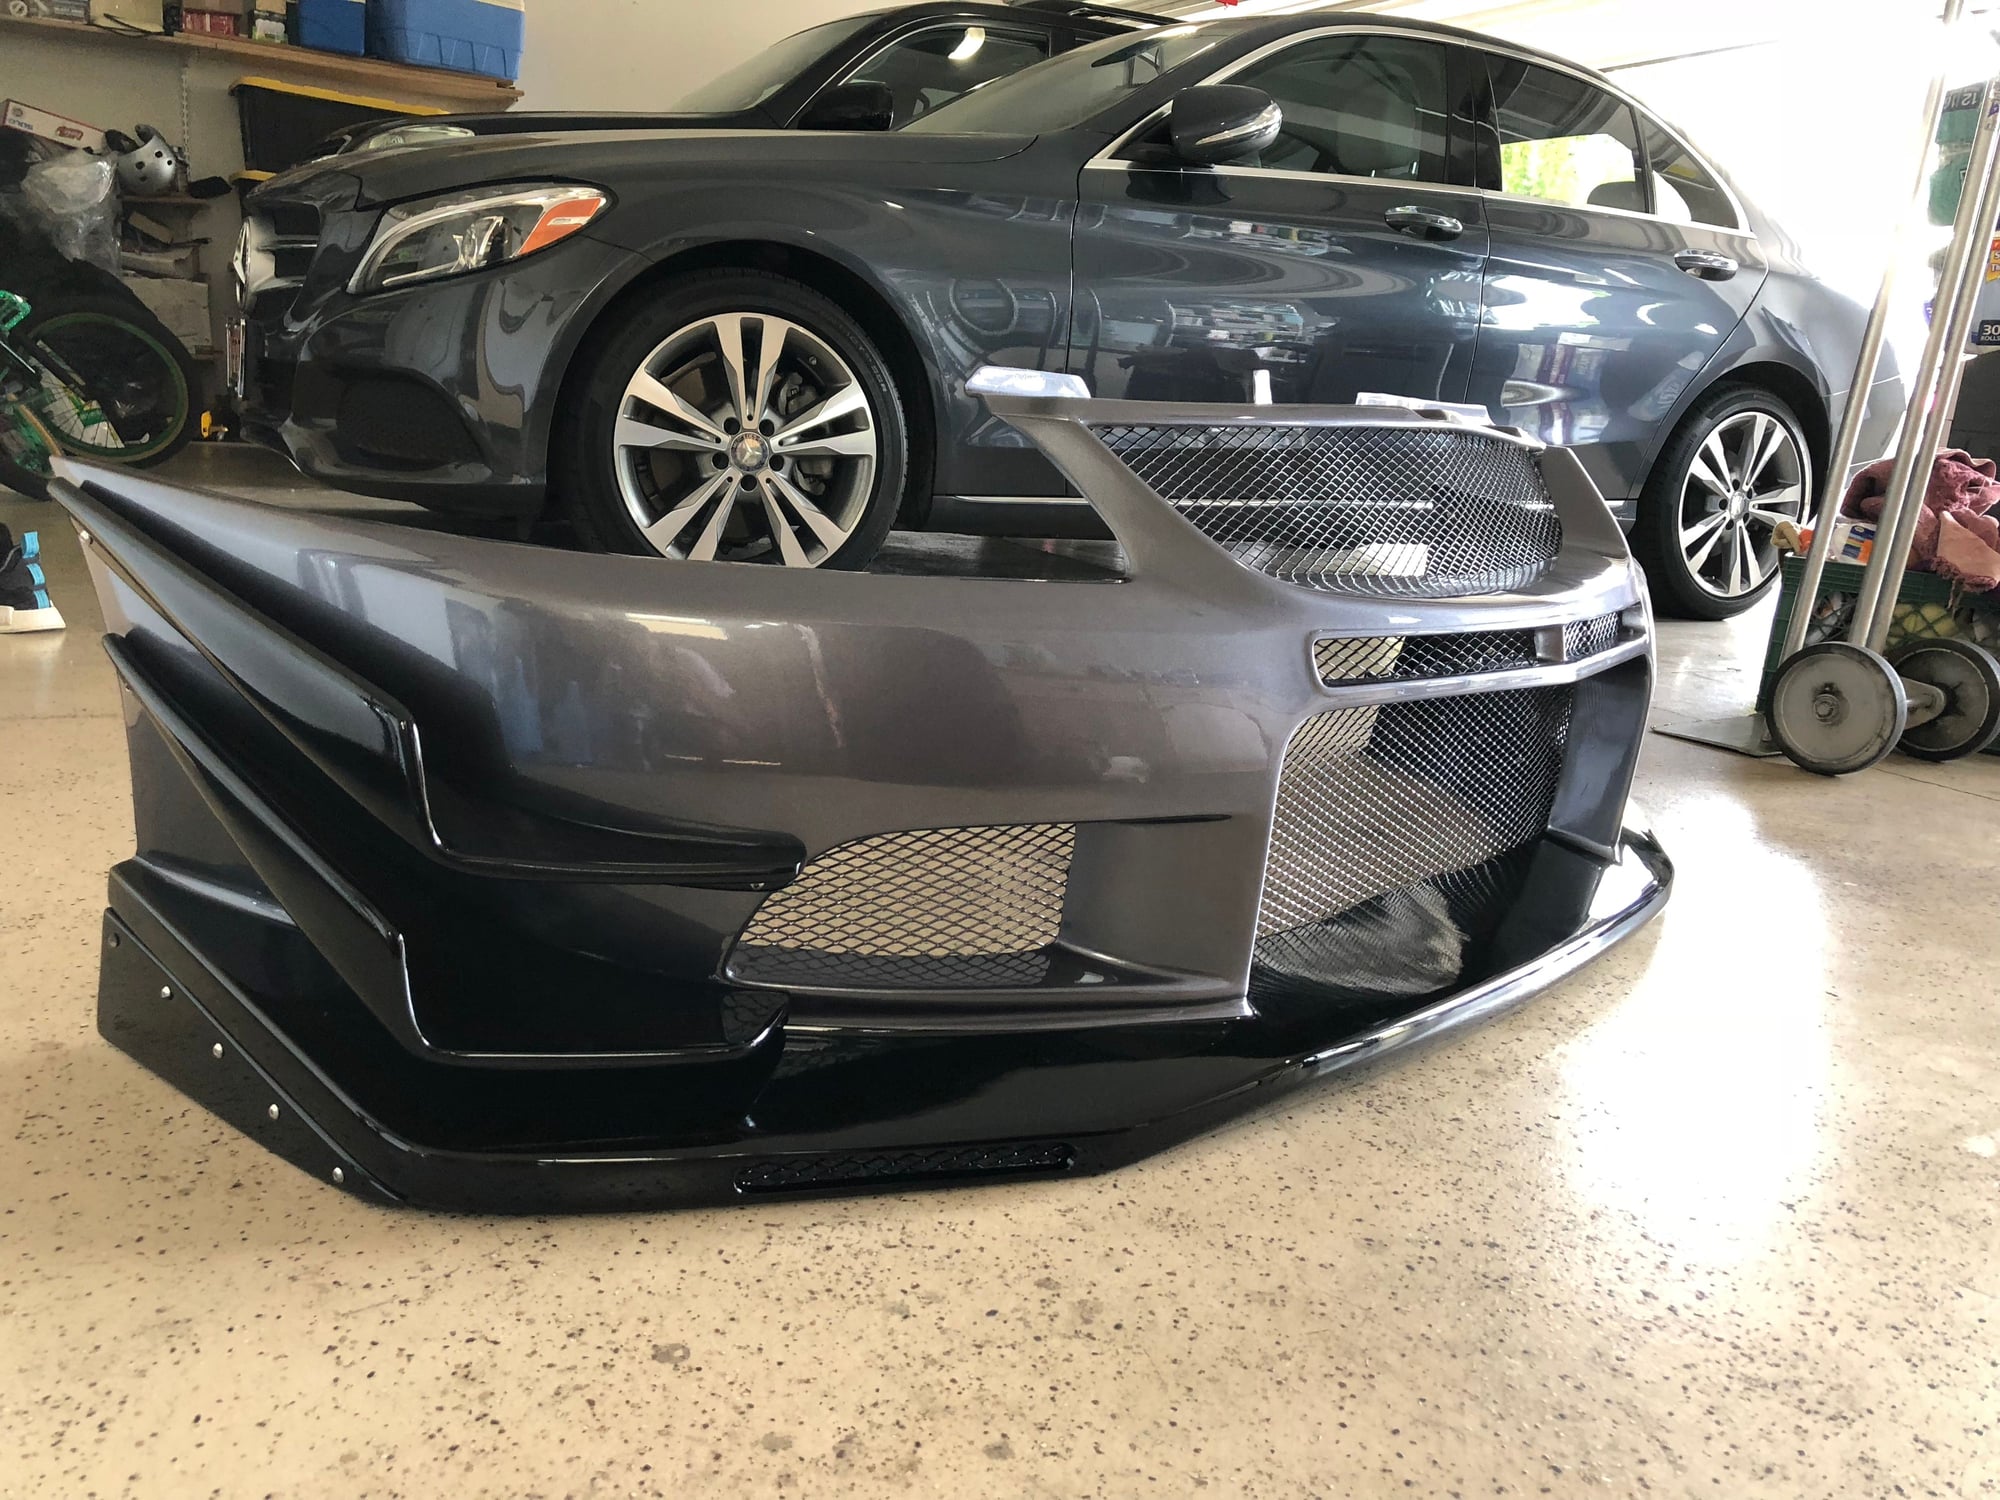 Exterior Body Parts - Evo front/rear bumper - New - 2003 to 2006 Mitsubishi Lancer Evolution - Mcminnville, OR 97128, United States